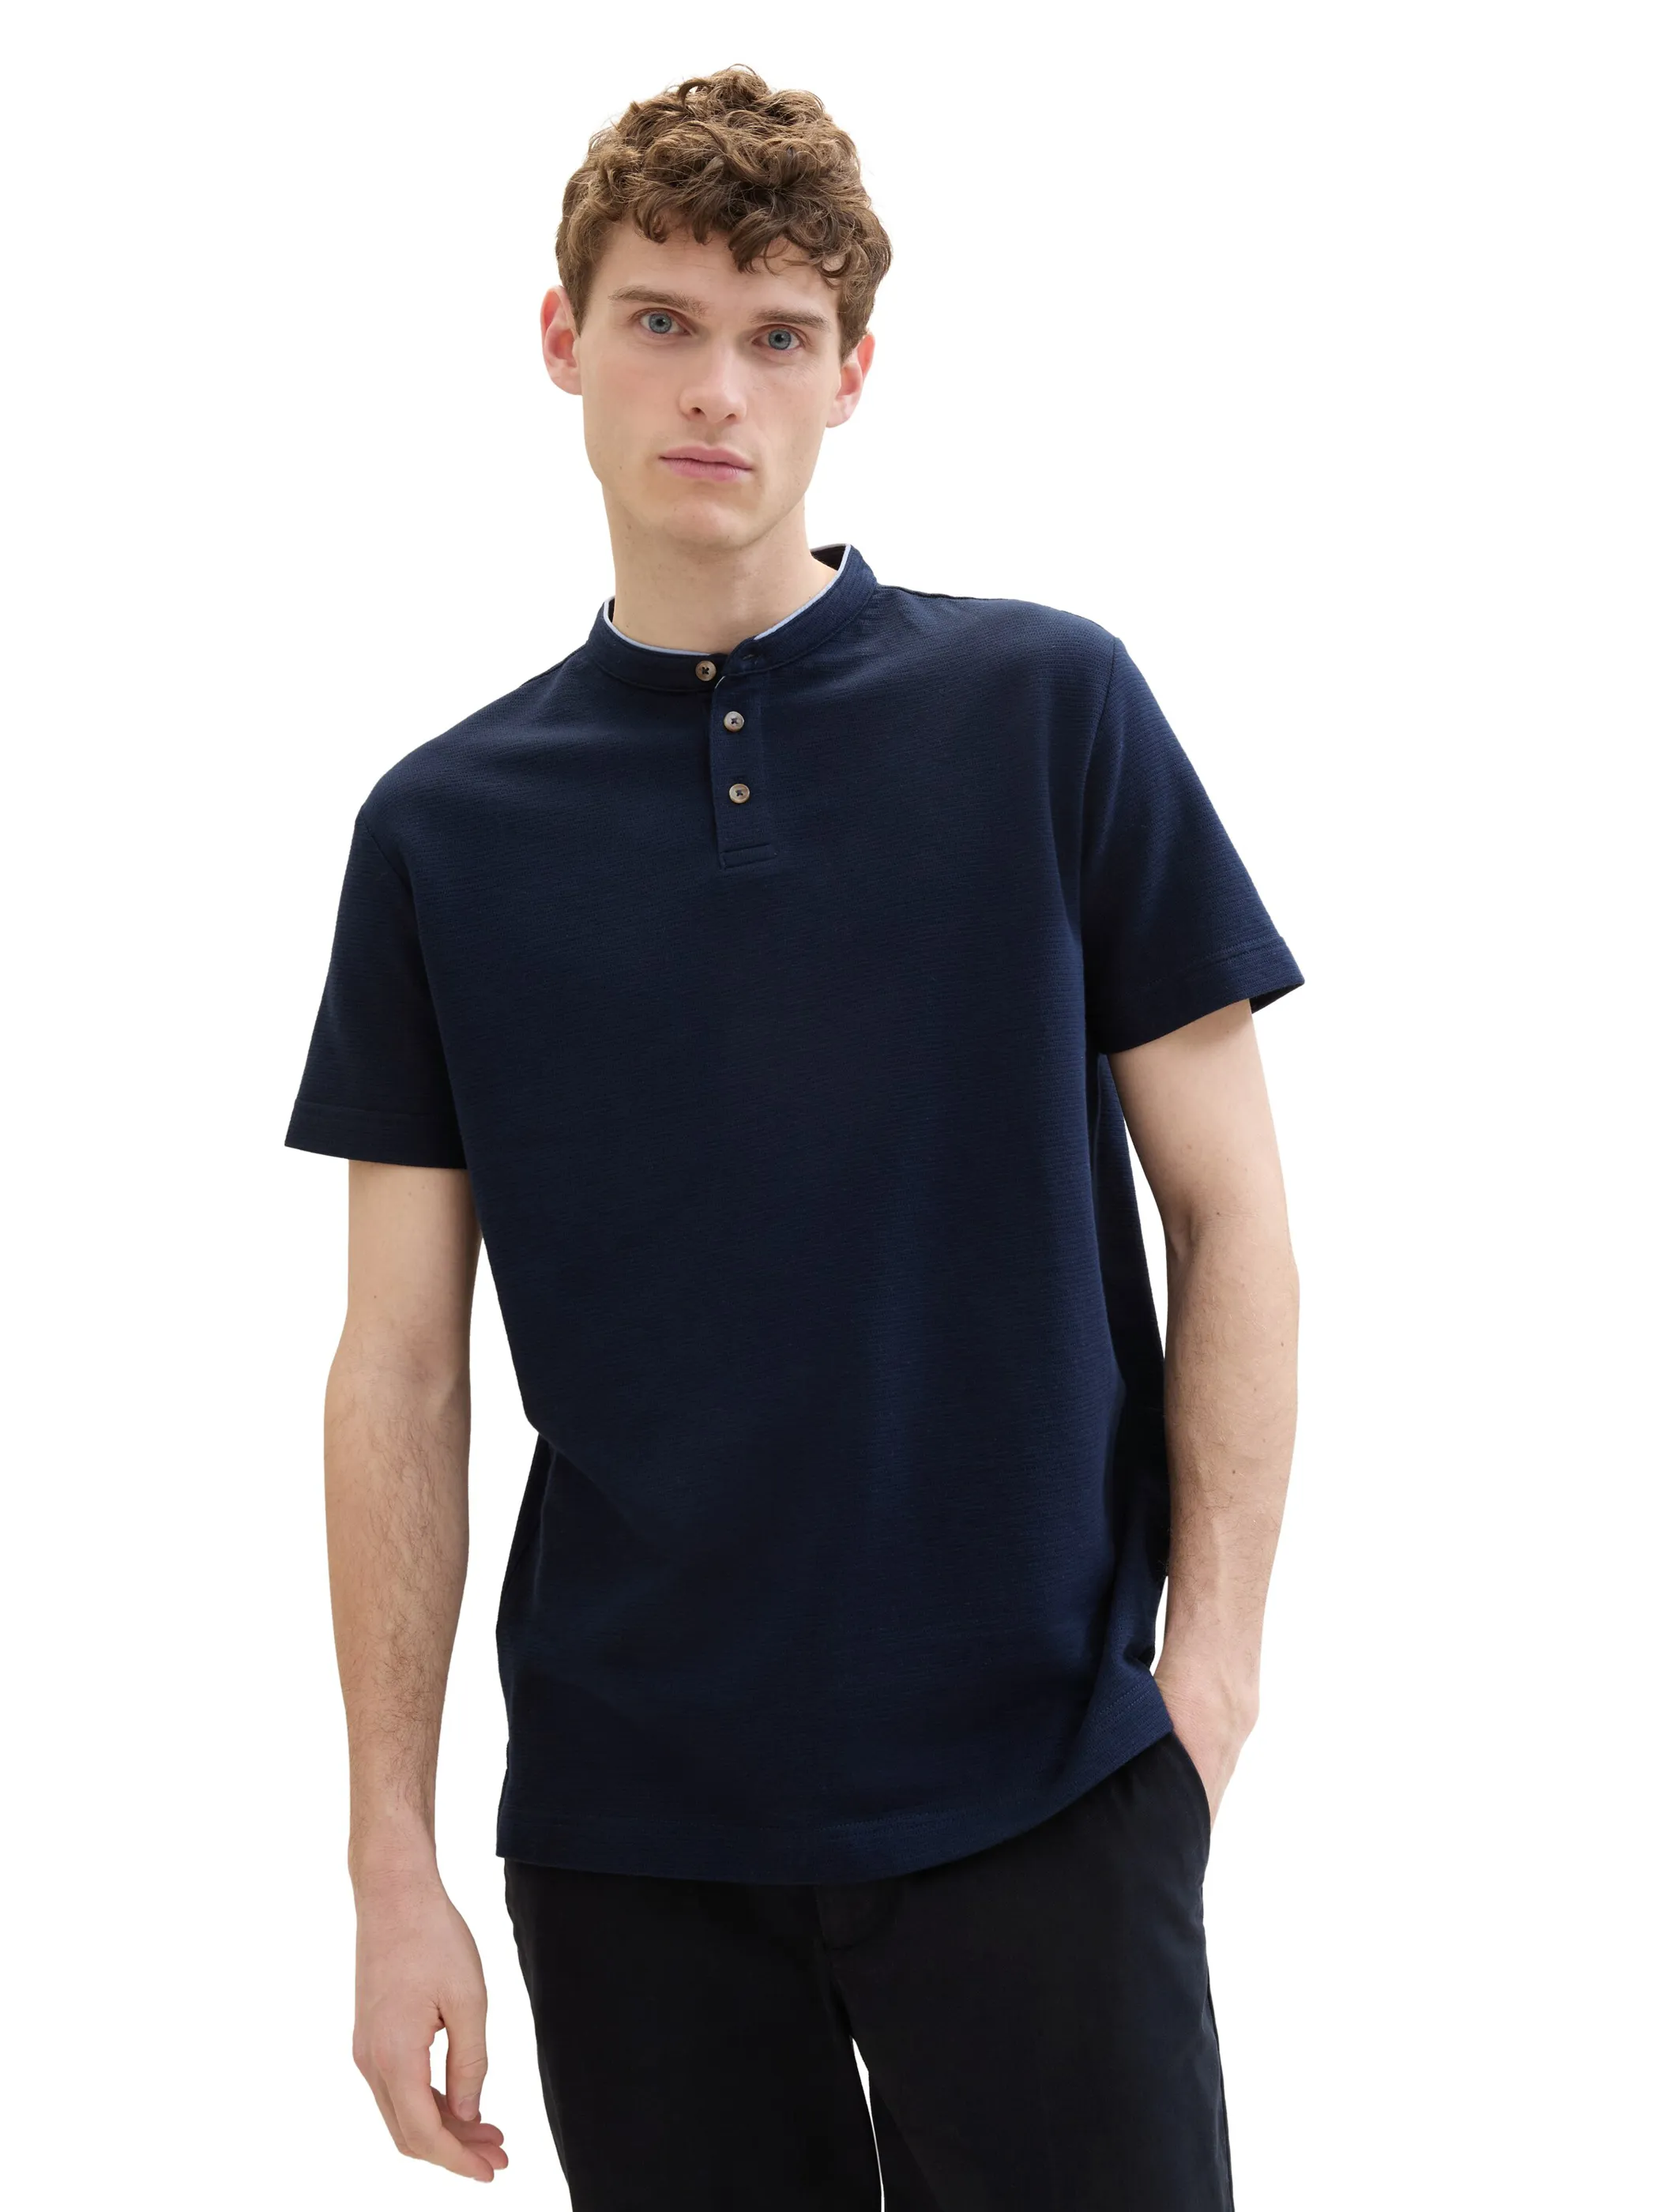 Tom Tailor 1041809 structured stand-up polo Blau 895687 10668 3